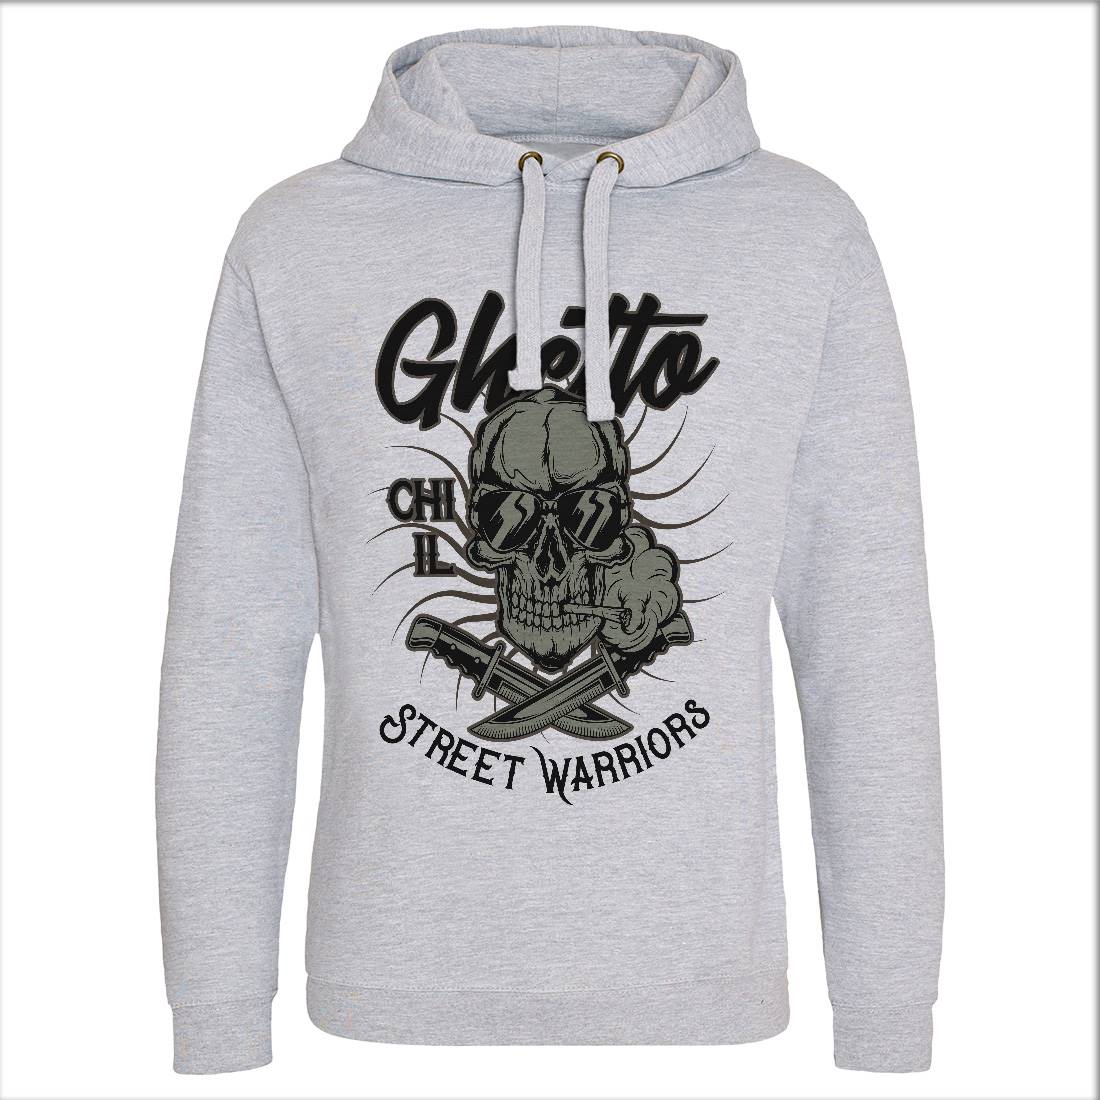 Ghetto Street Warriors Mens Hoodie Without Pocket Retro D937